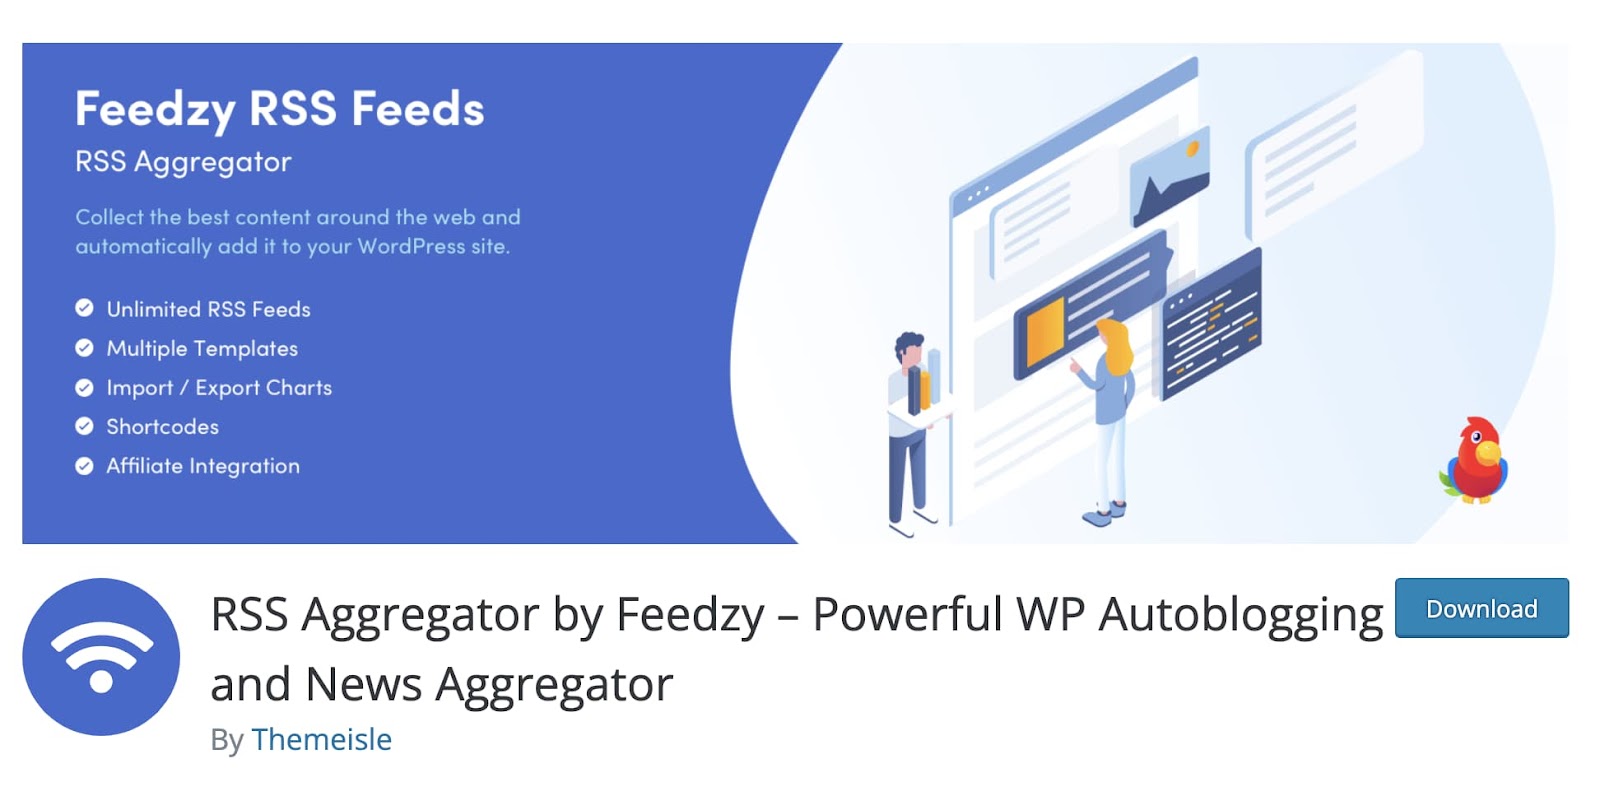 Feedzy is an RSS aggregator plugin from ThemeIsle